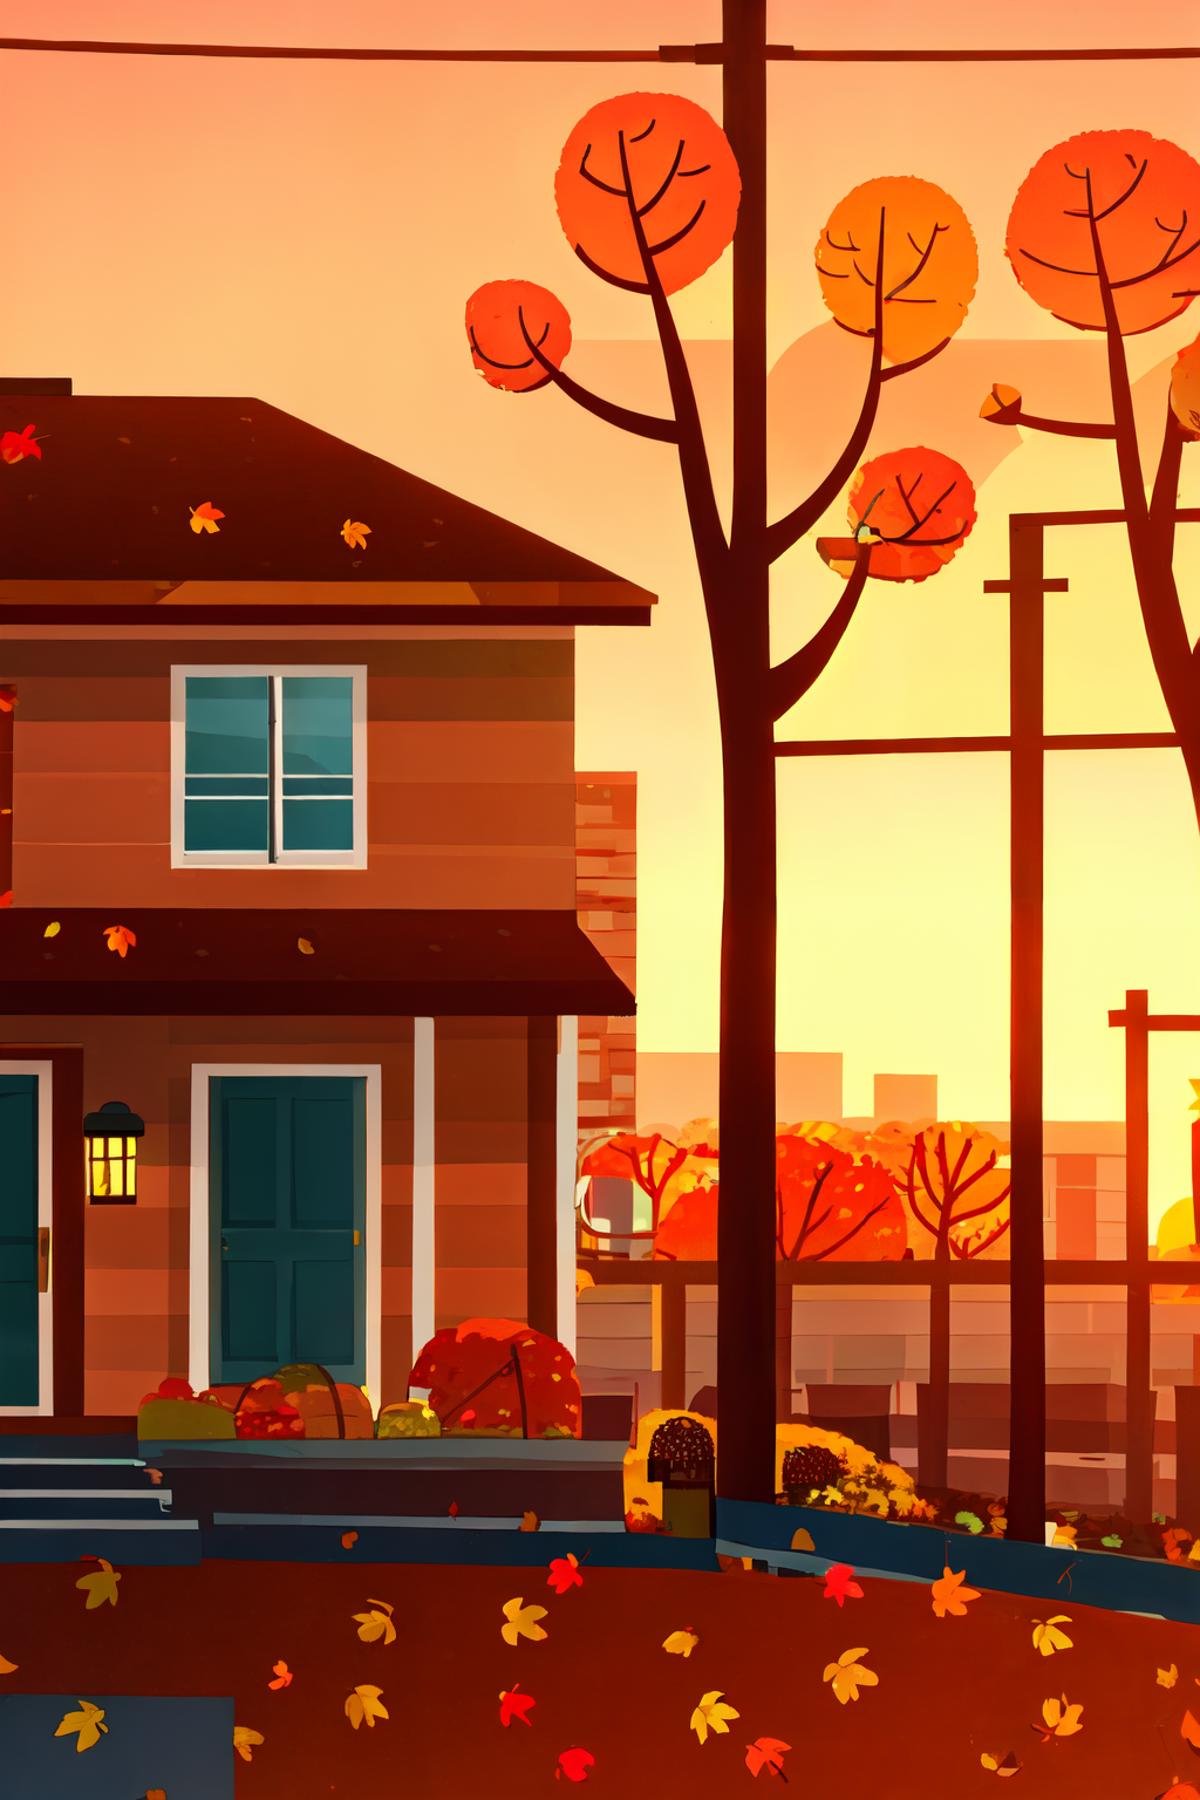 Night In The Woods style background image by Goofy_Ai